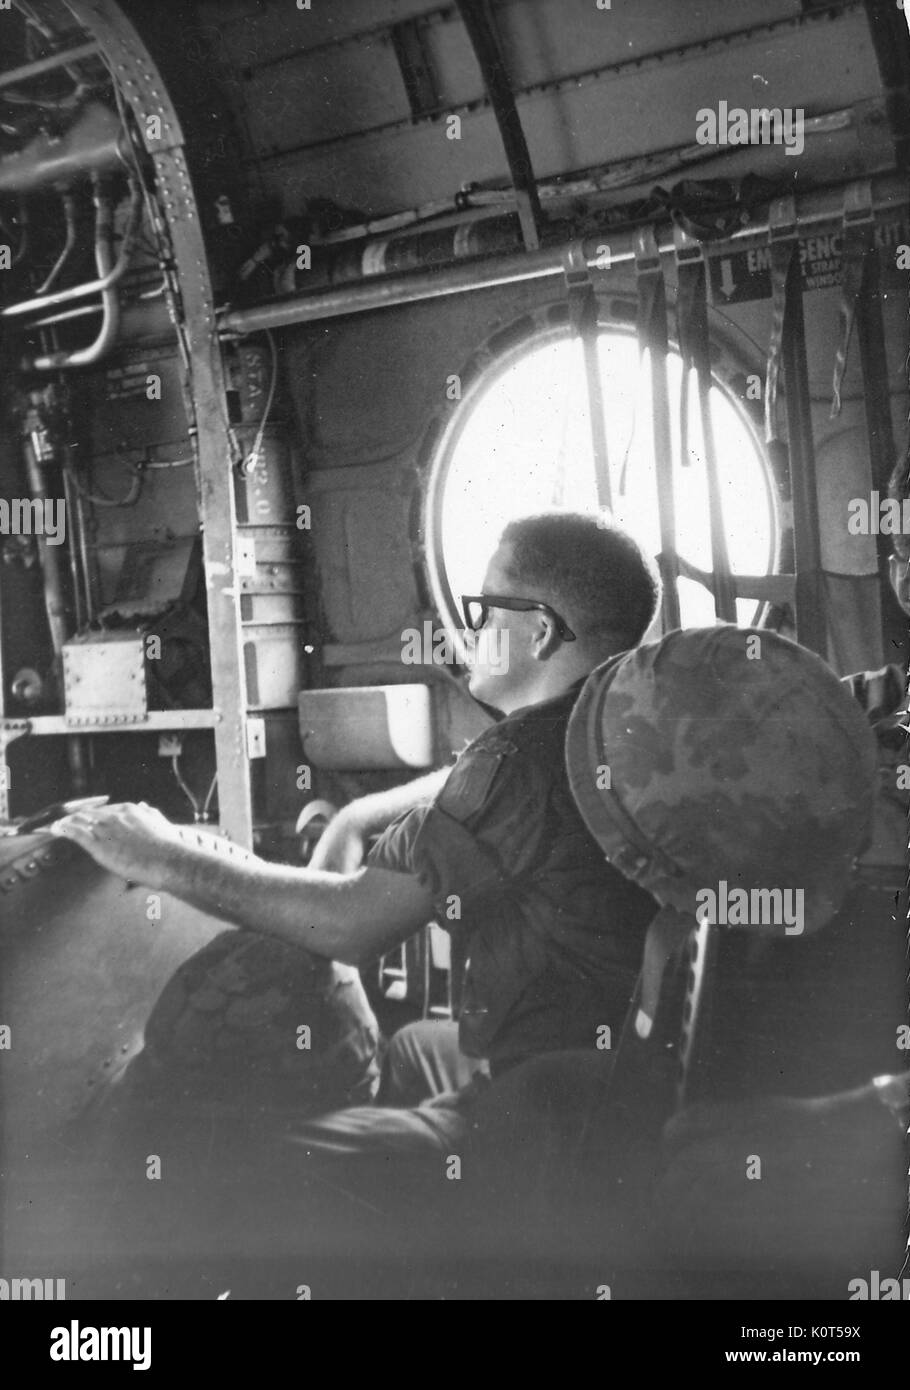 A United States Army serviceman seated near a large window on an airplane, he has his gear between his legs and a helmet hanging from his chair, Vietnam, 1967. Stock Photo